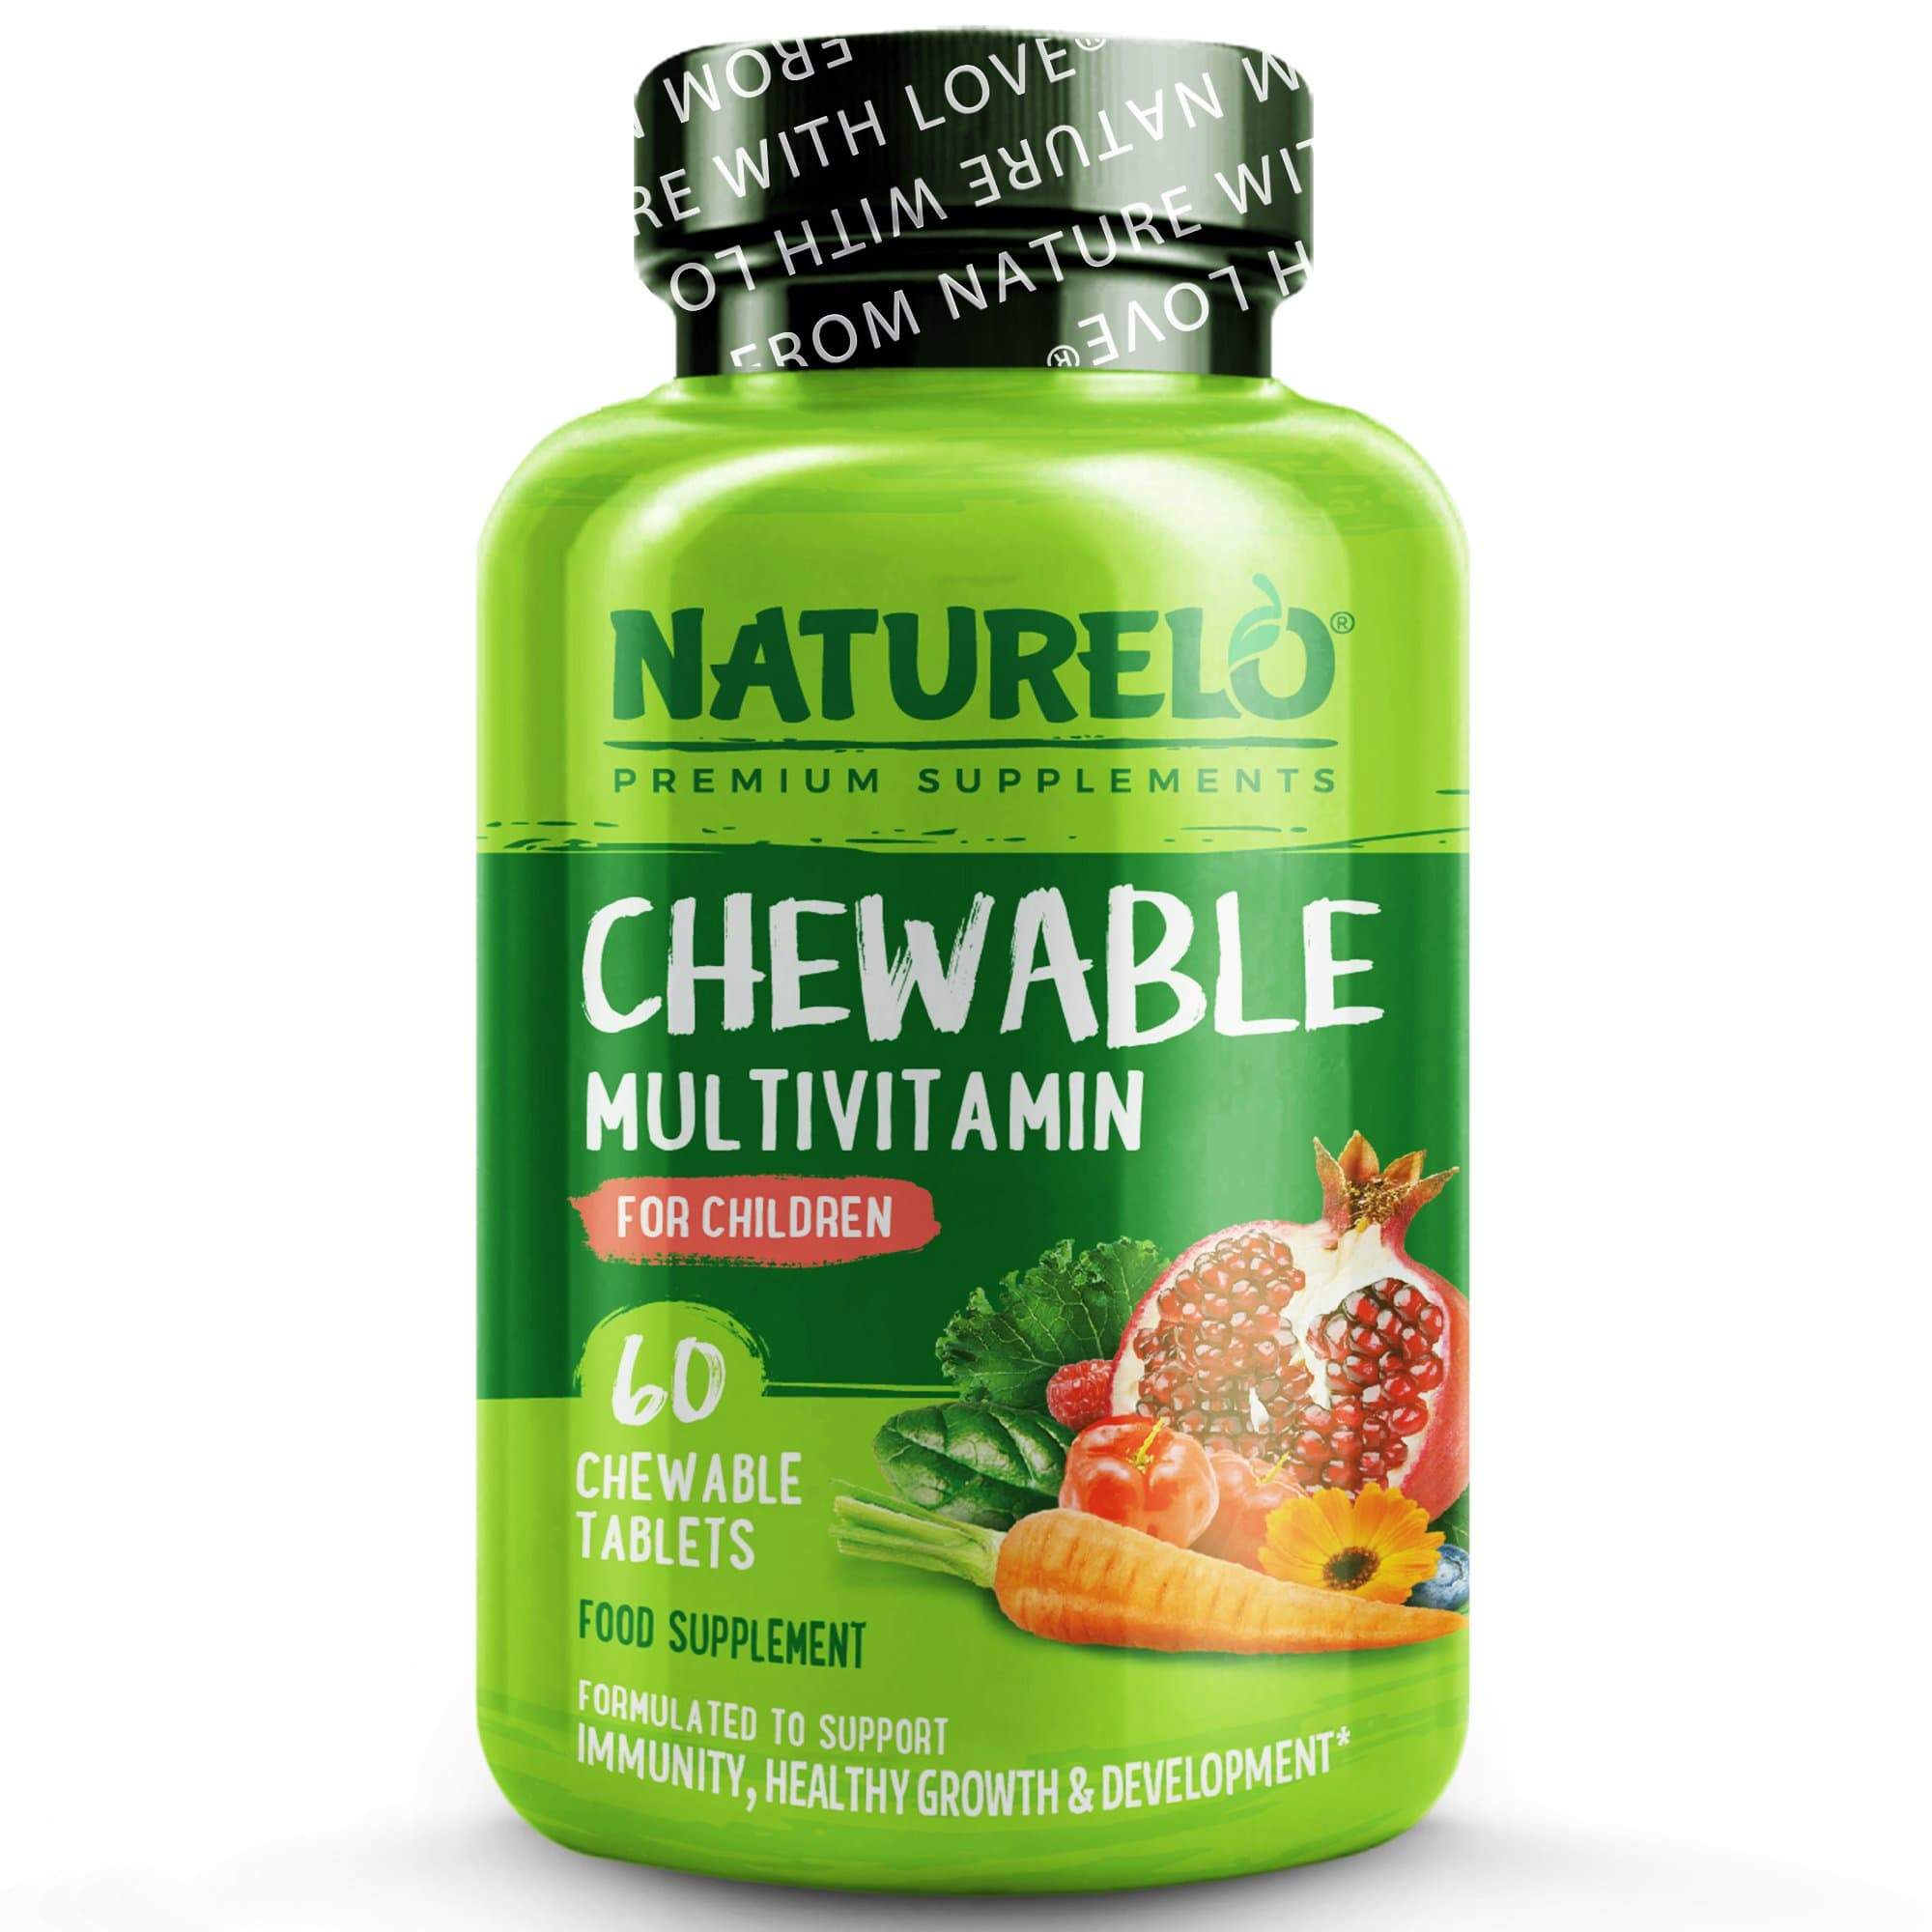 Chewable Multivitamin for Children with Natural Vitamins, Fruit Extracts & No Sugar